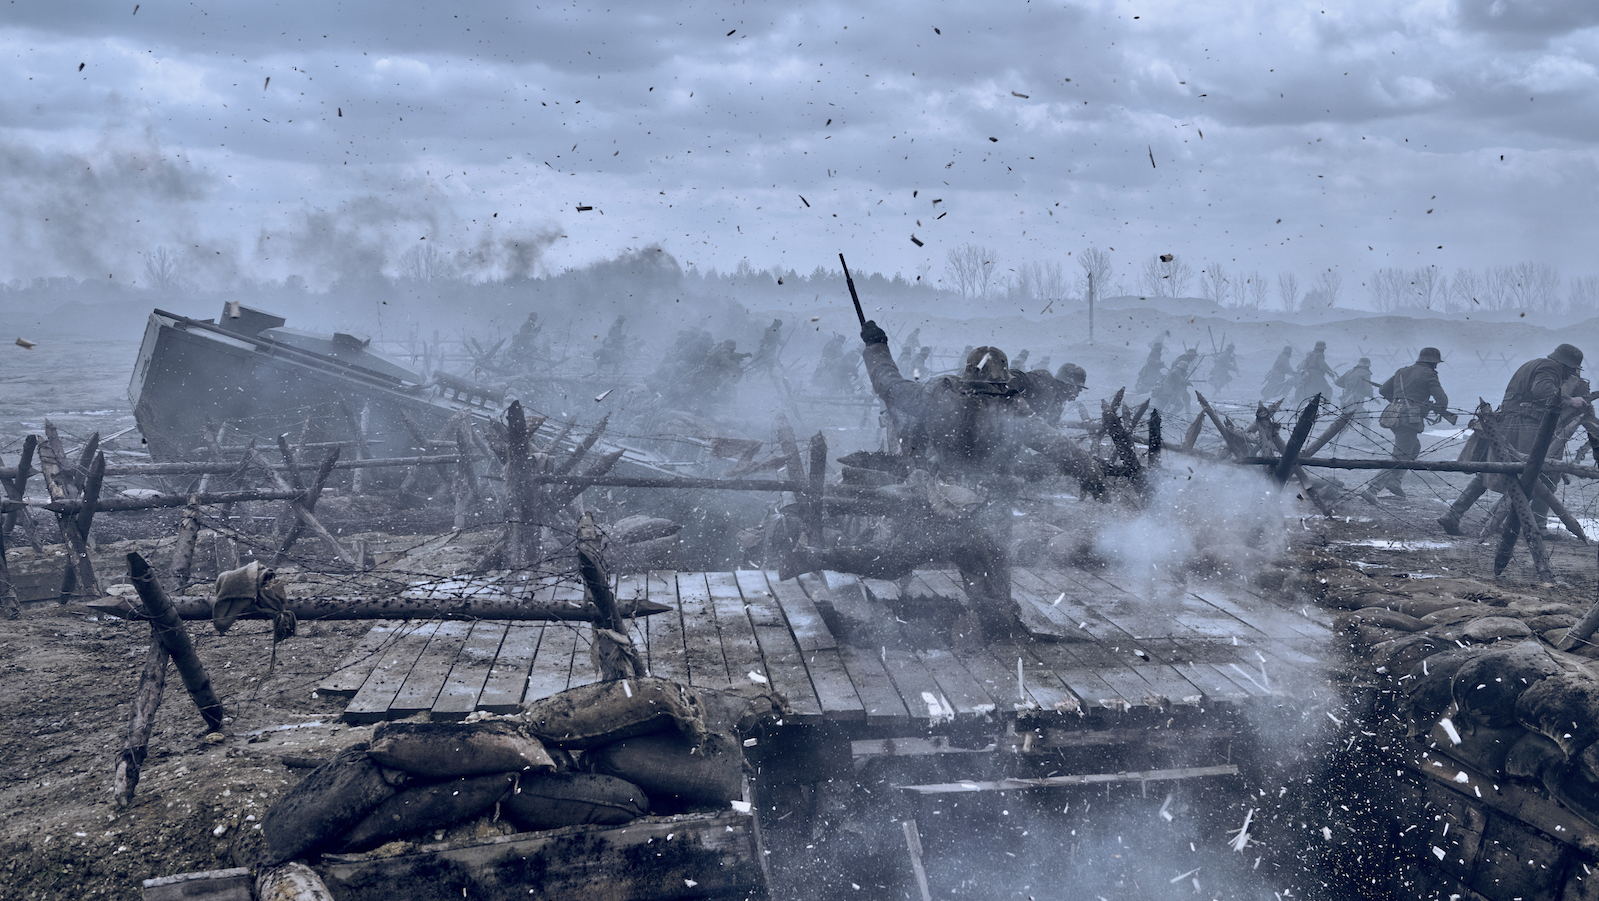 Soldiers fighting on a bridge as it's being decimated by bullets and shrapnel